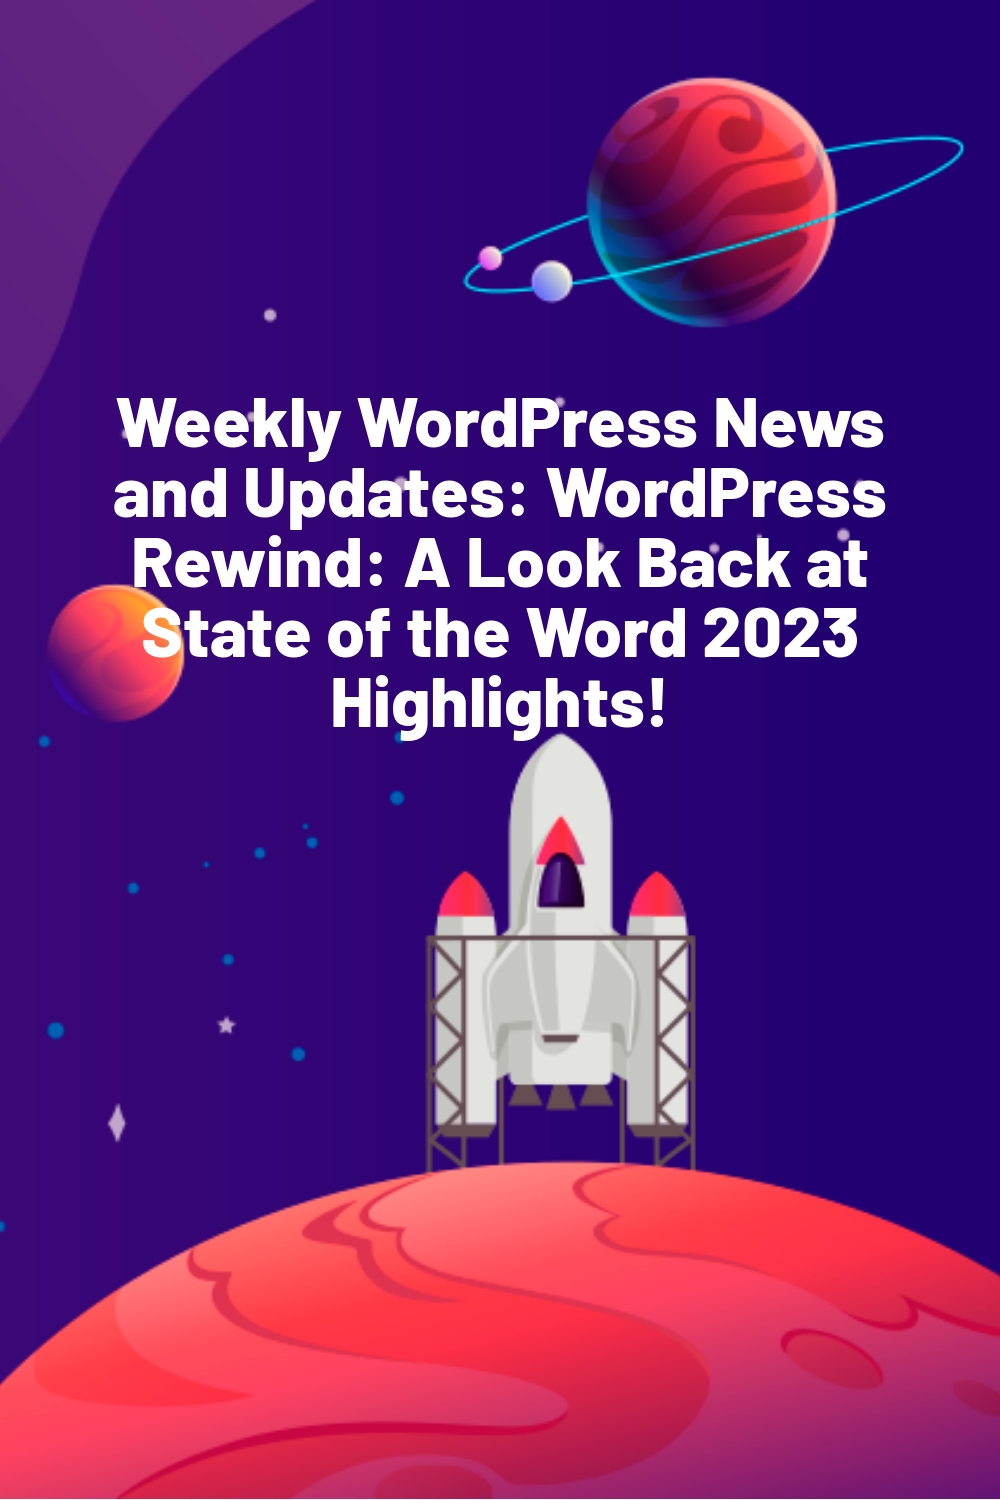 Weekly WordPress News and Updates: WordPress Rewind: A Look Back at State of the Word 2023 Highlights!